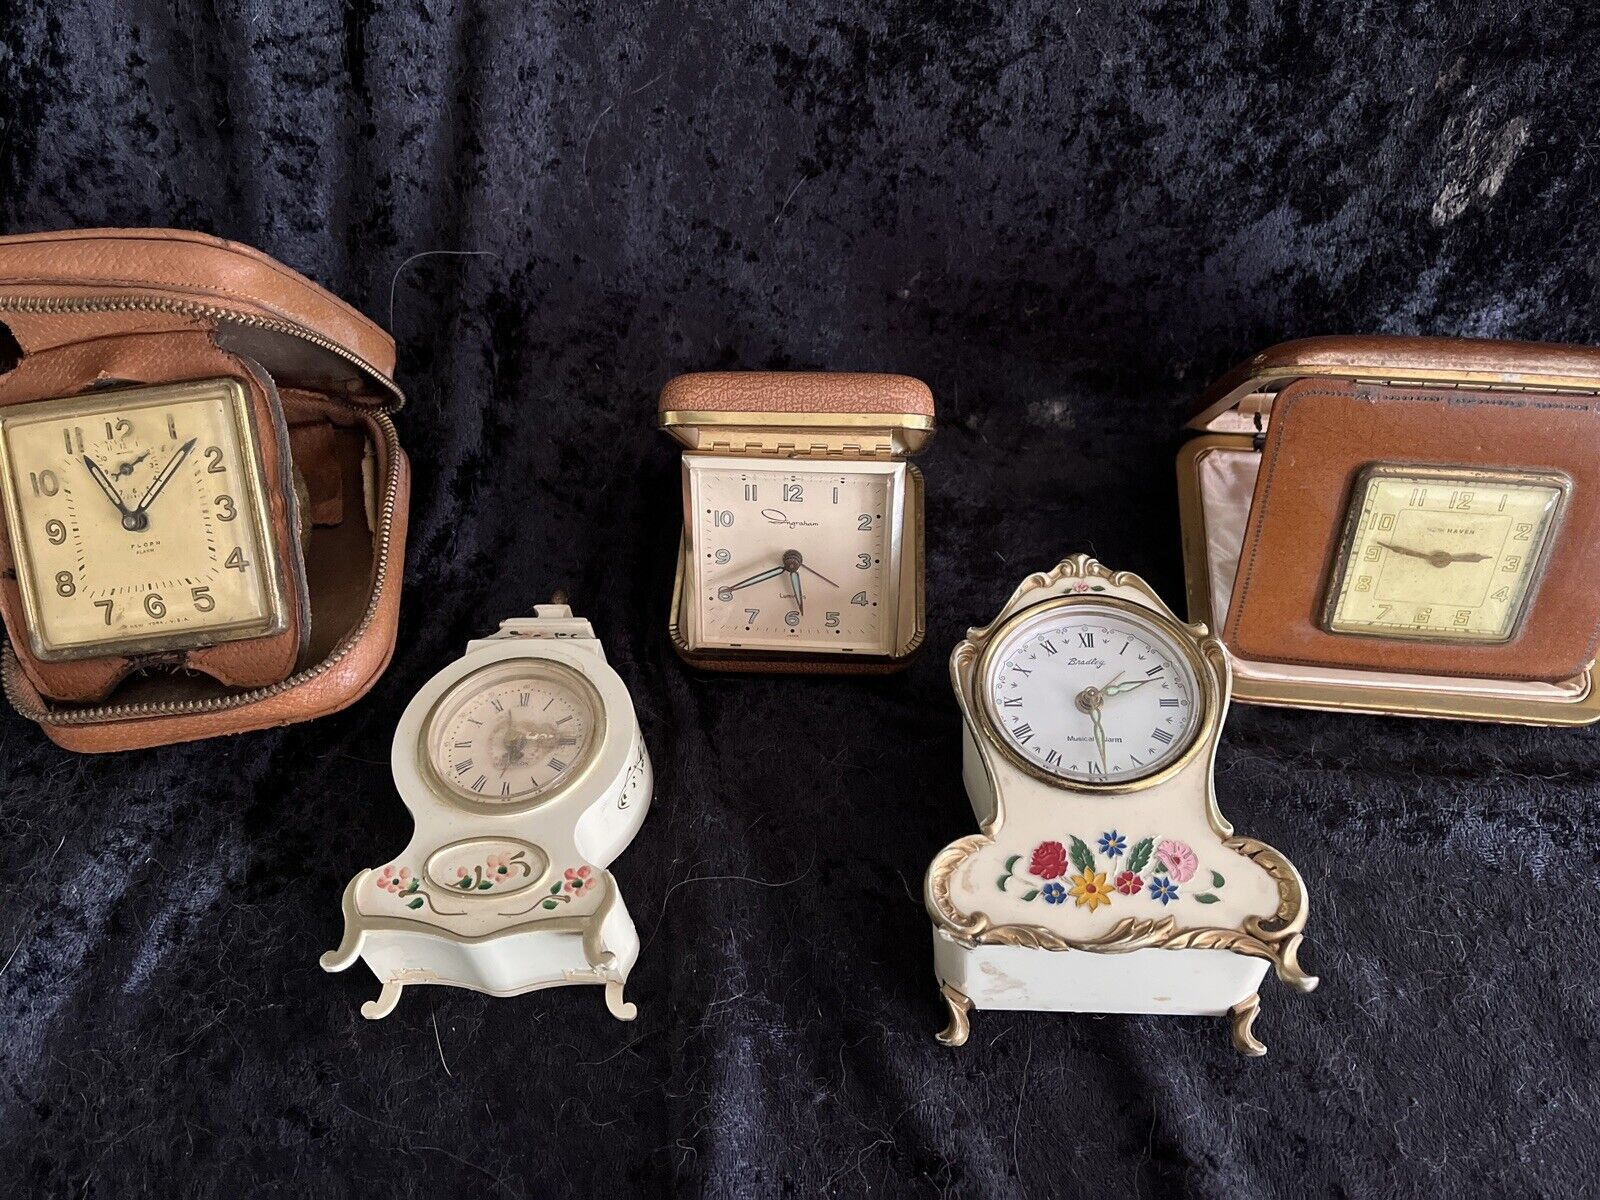 Lot Of 5 Vintage Clocks - May Or May Not Work